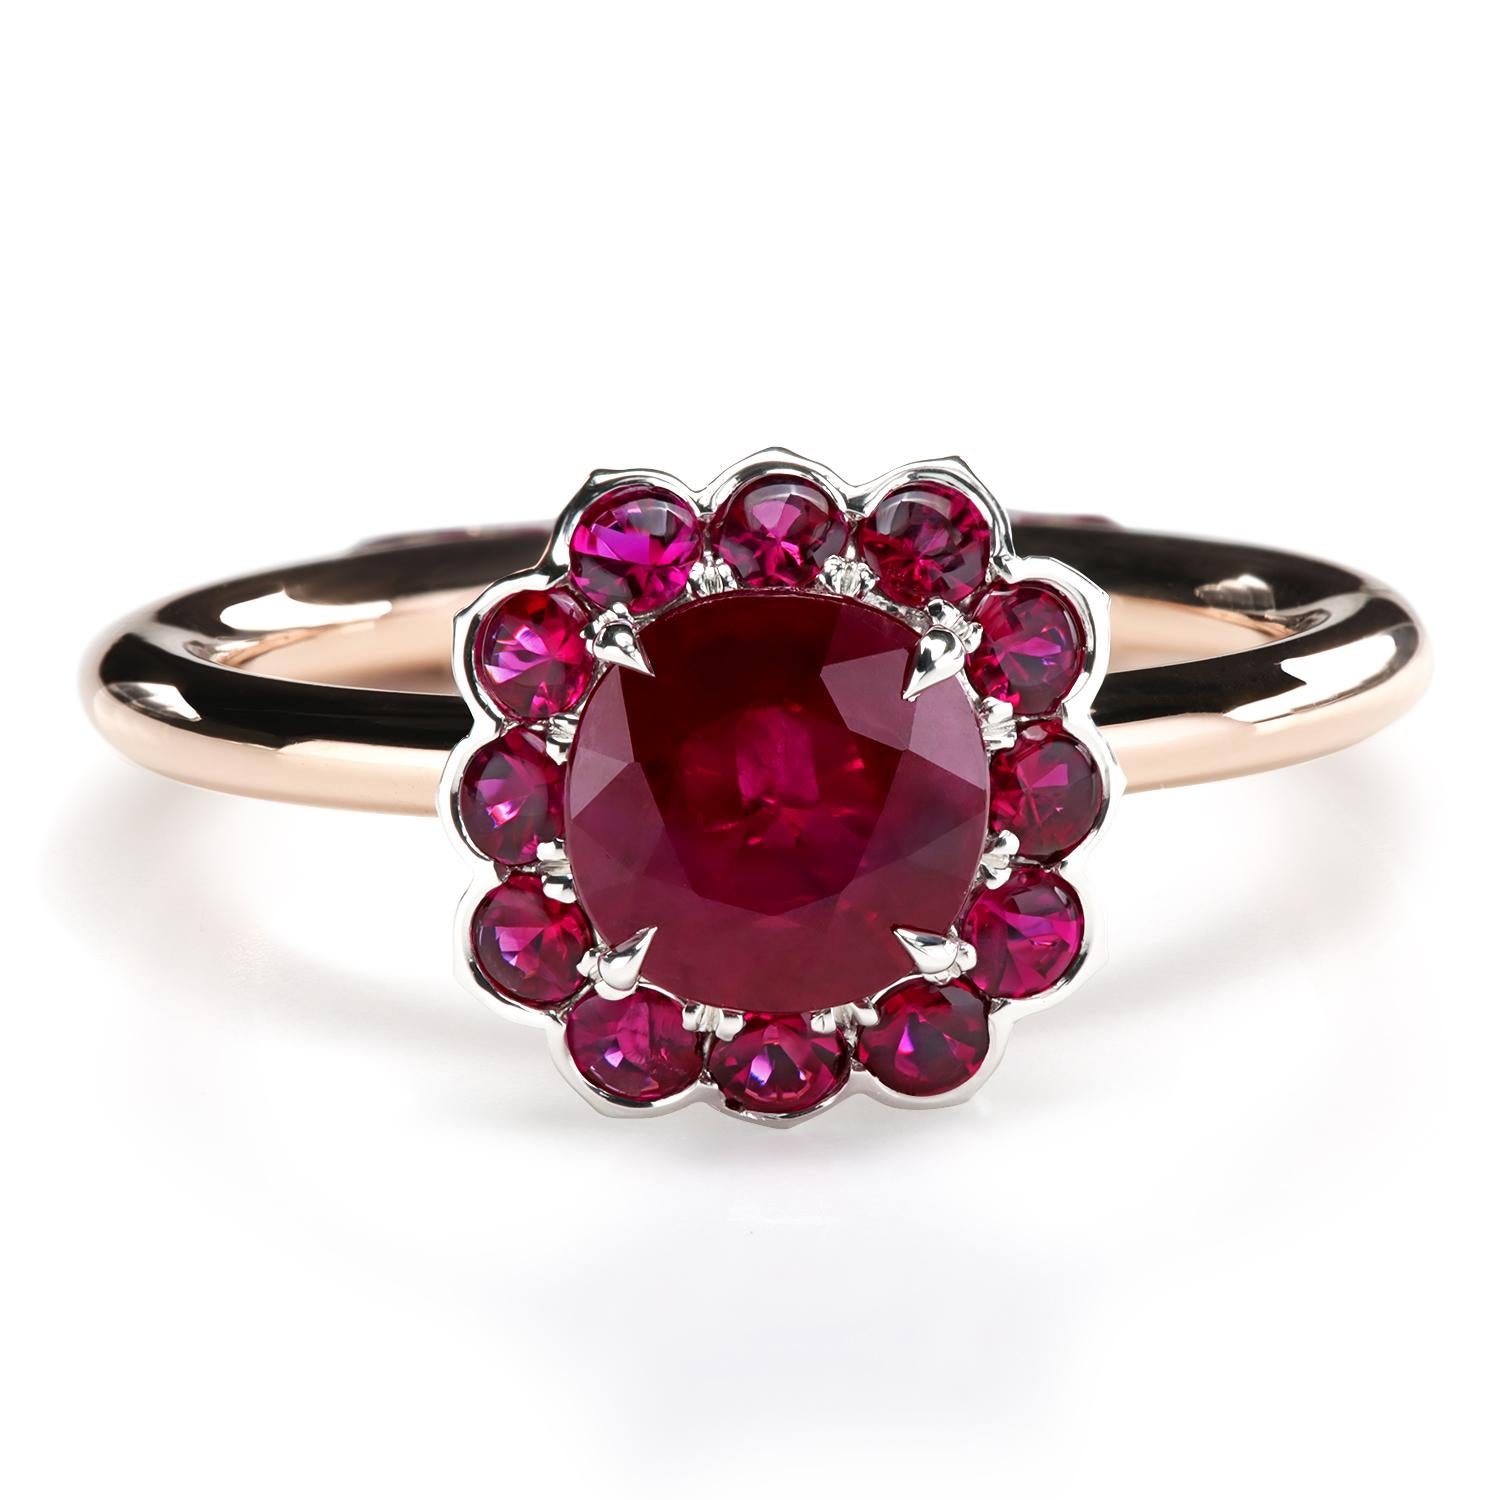 Leon Mege Red Flamingo ring with a natural 1.15-carat ruby is designed to be as exceptional as the love it symbolizes. The Podium base set with European buffed-top rubies provides an alternative look for casual wear. 
Center stone is round